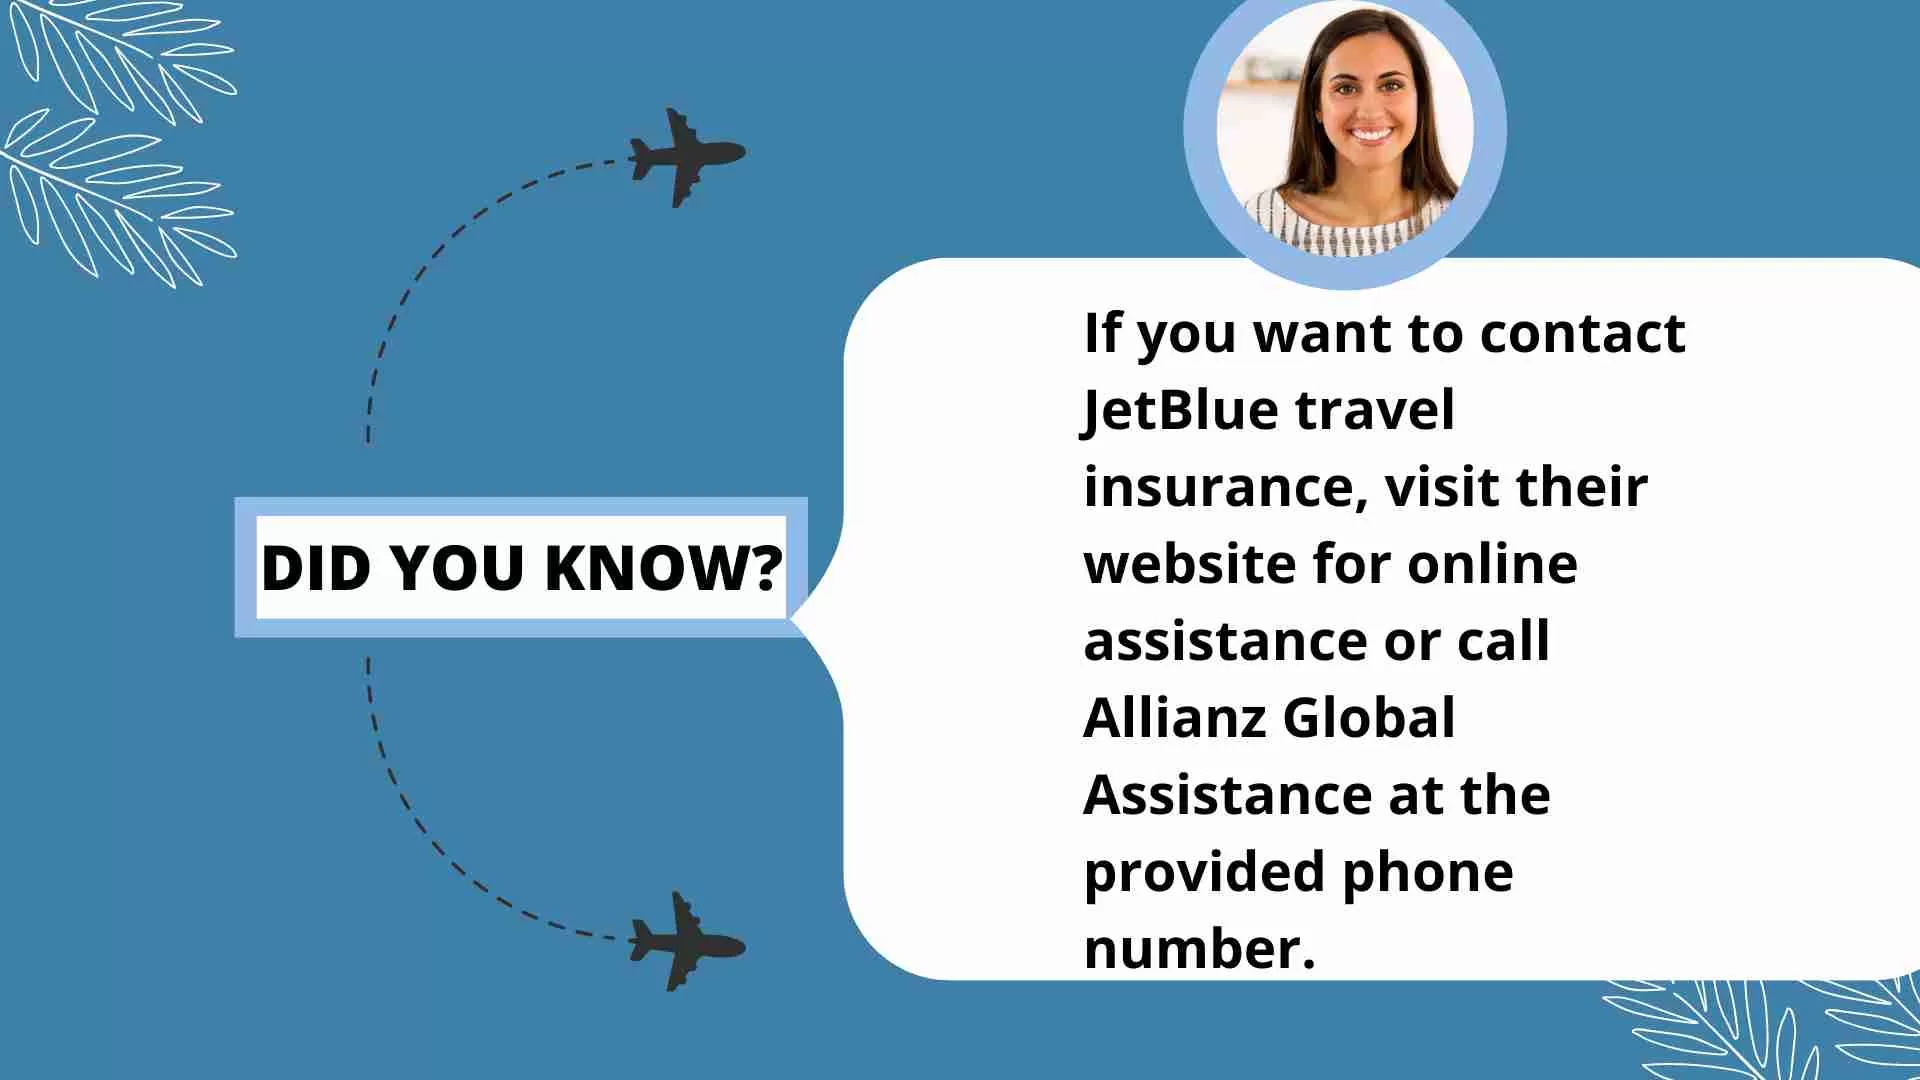 How to Contact Travel Insurance JetBlue